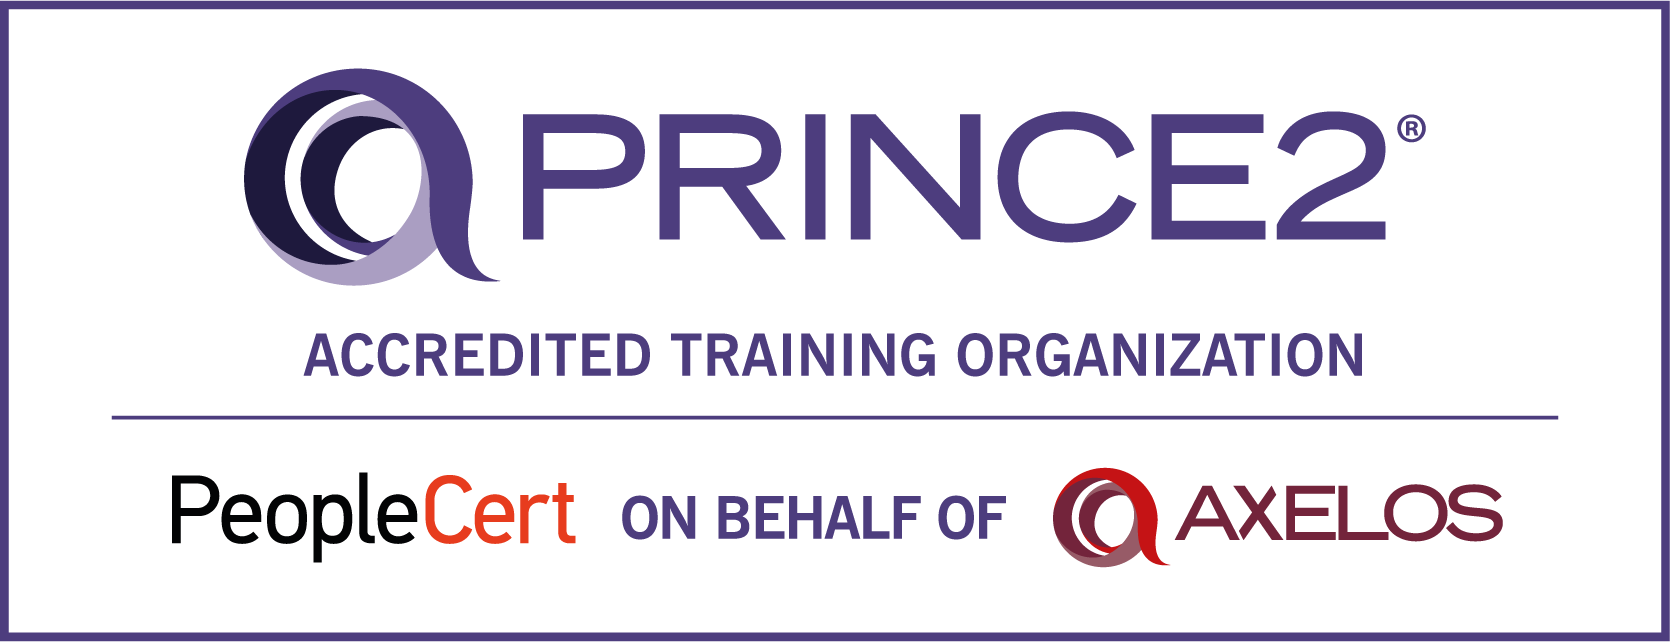 formation prince2